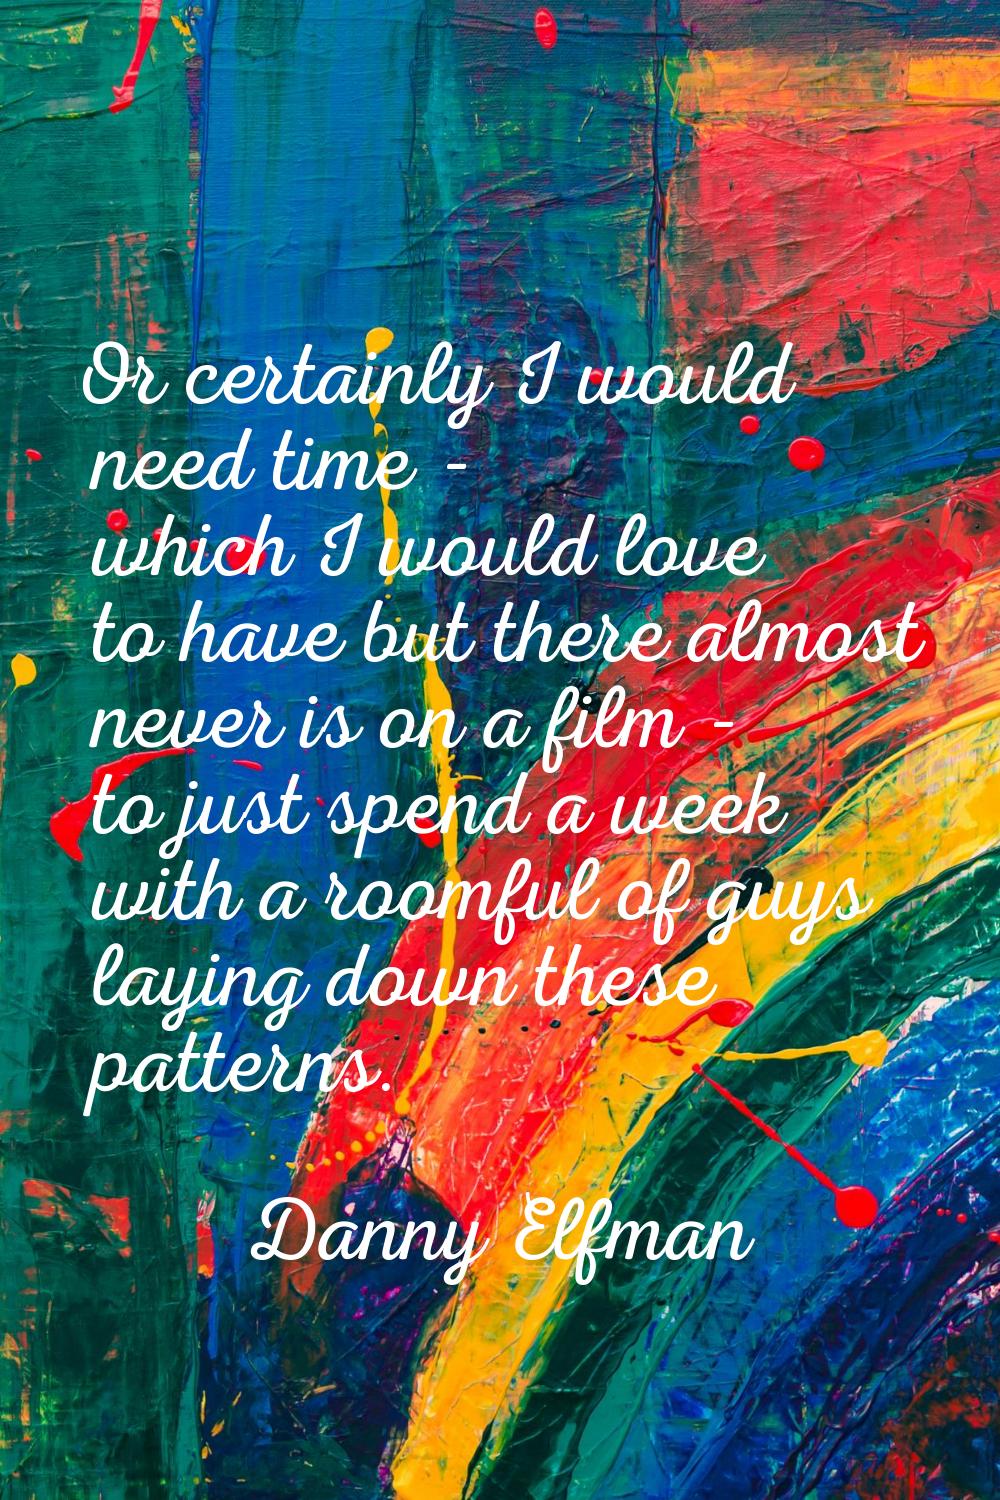 Or certainly I would need time - which I would love to have but there almost never is on a film - t